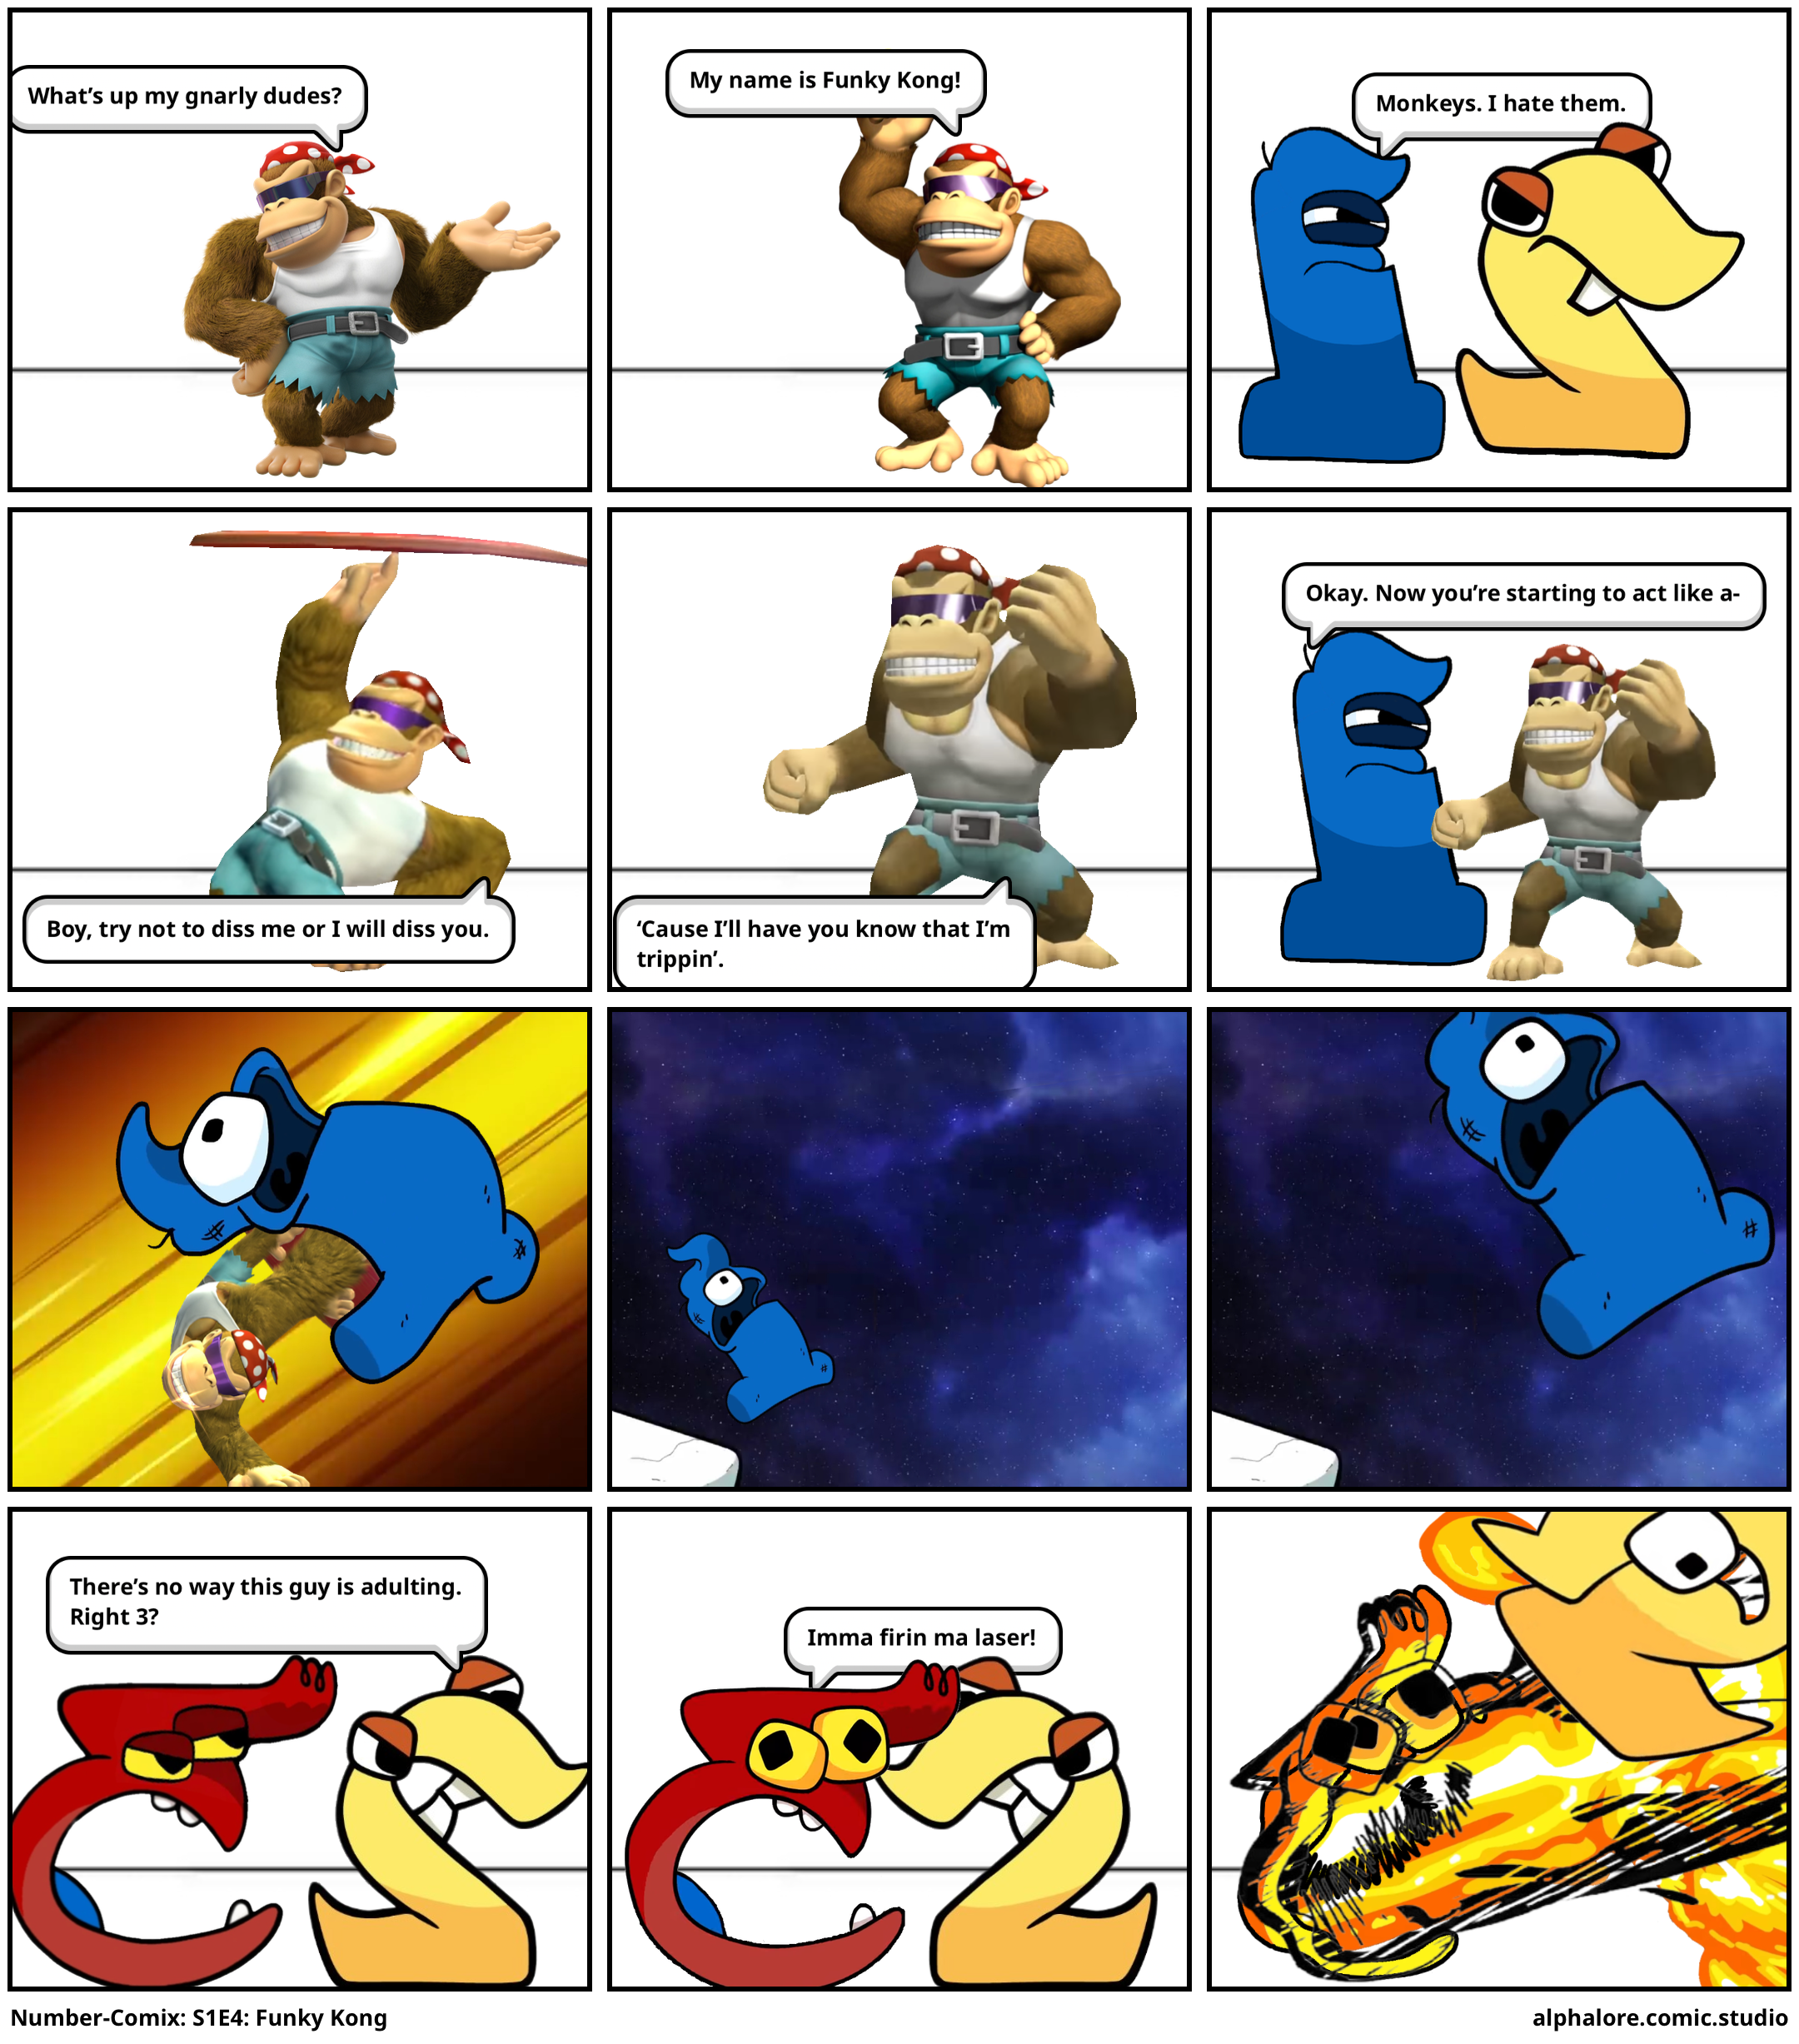 Number-Comix: S1E4: Funky Kong